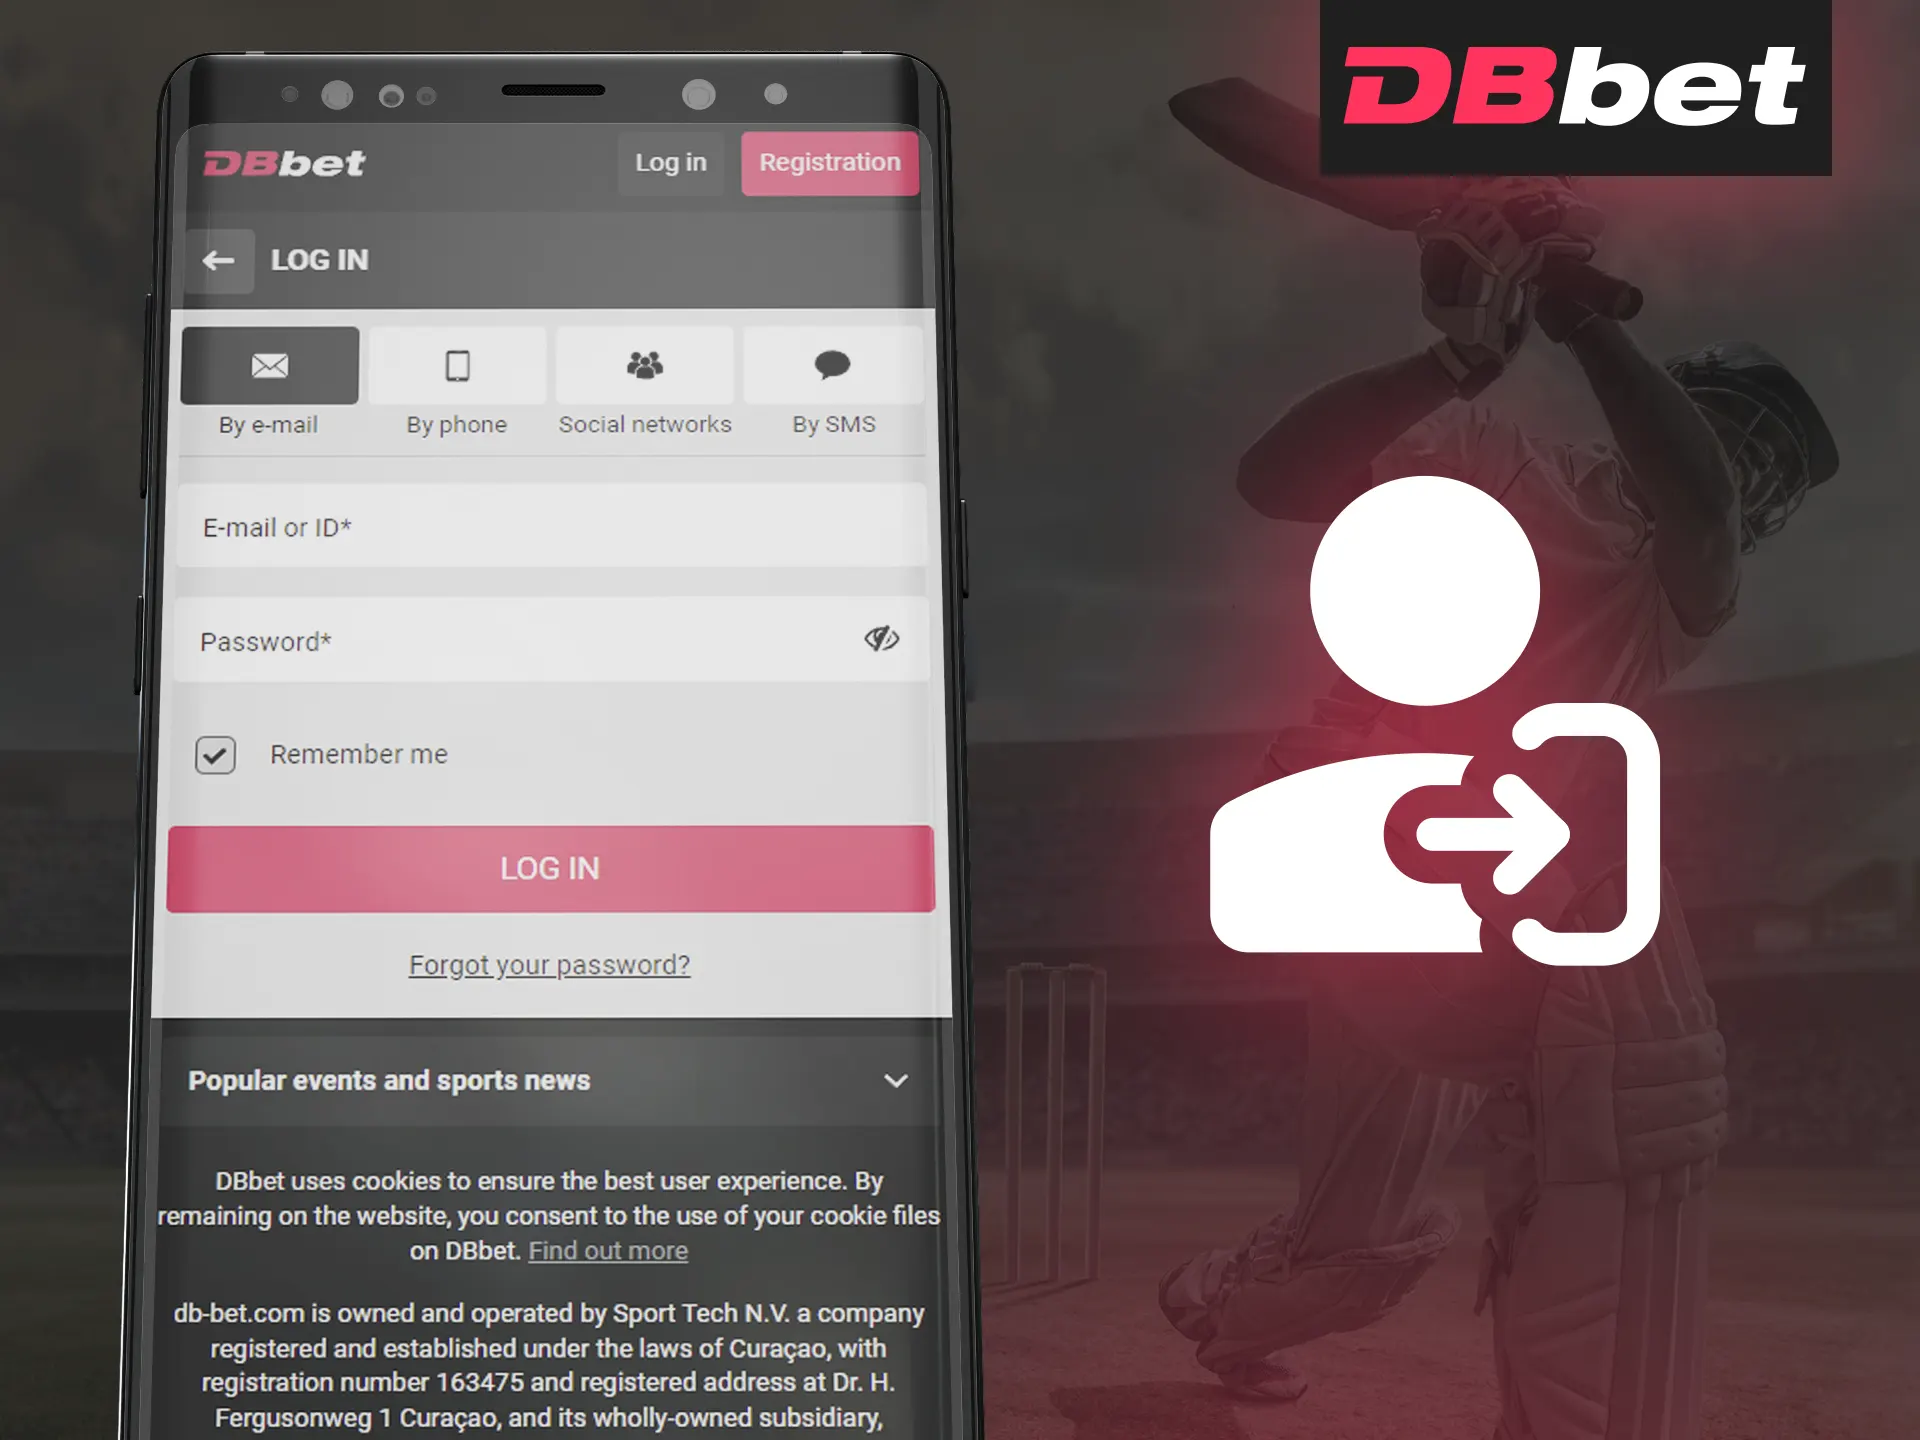 Log in to your account on the DBBet app.